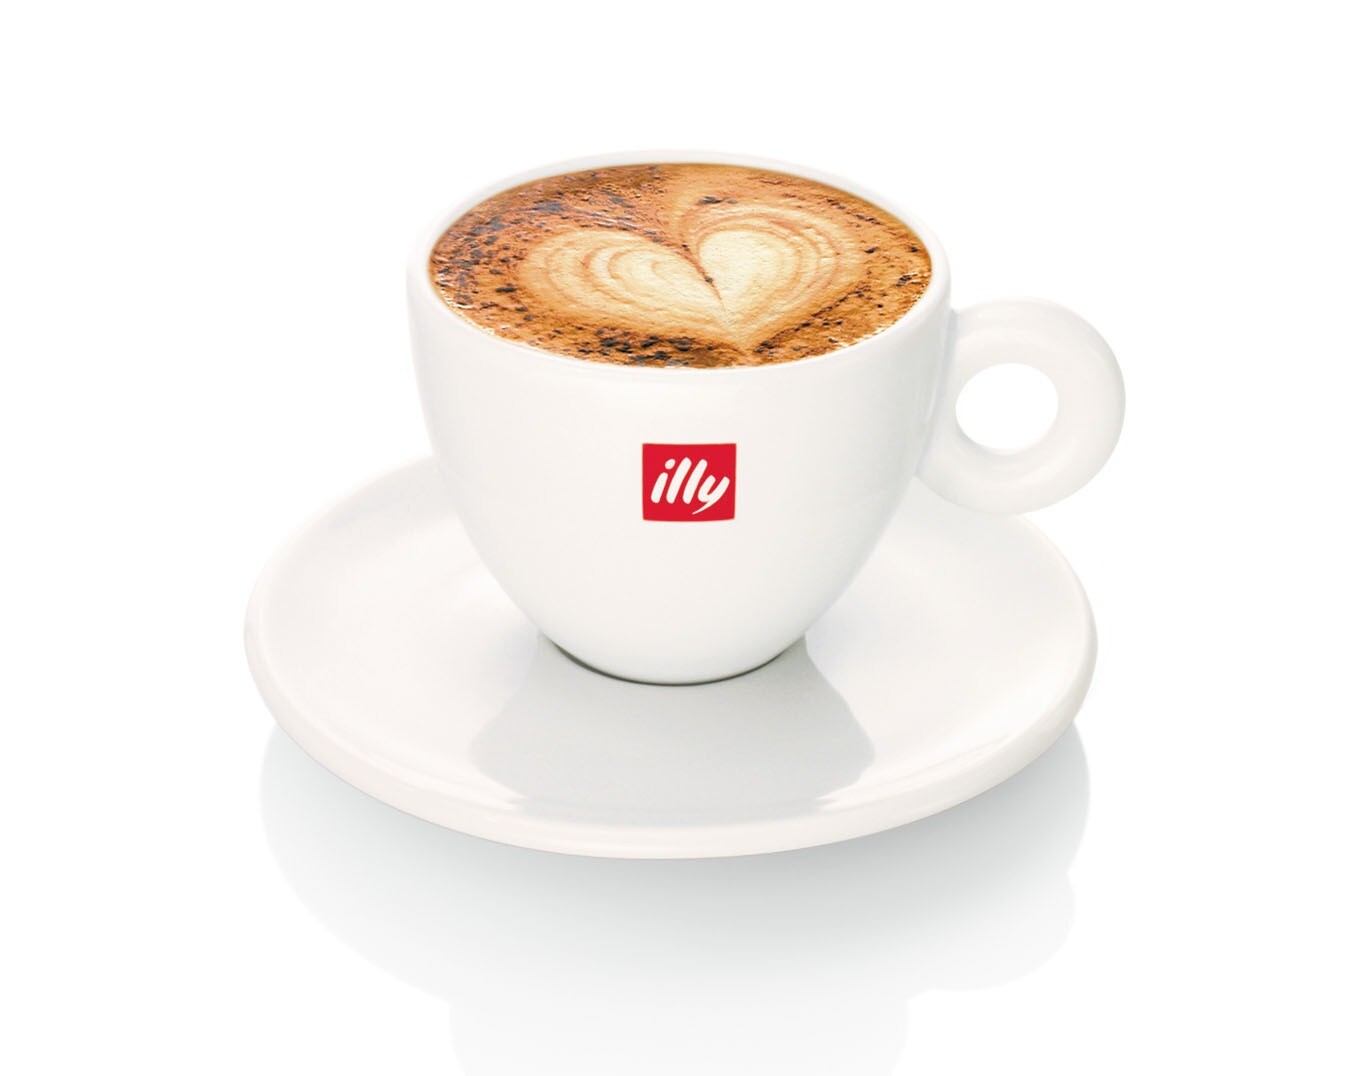 illy koffie